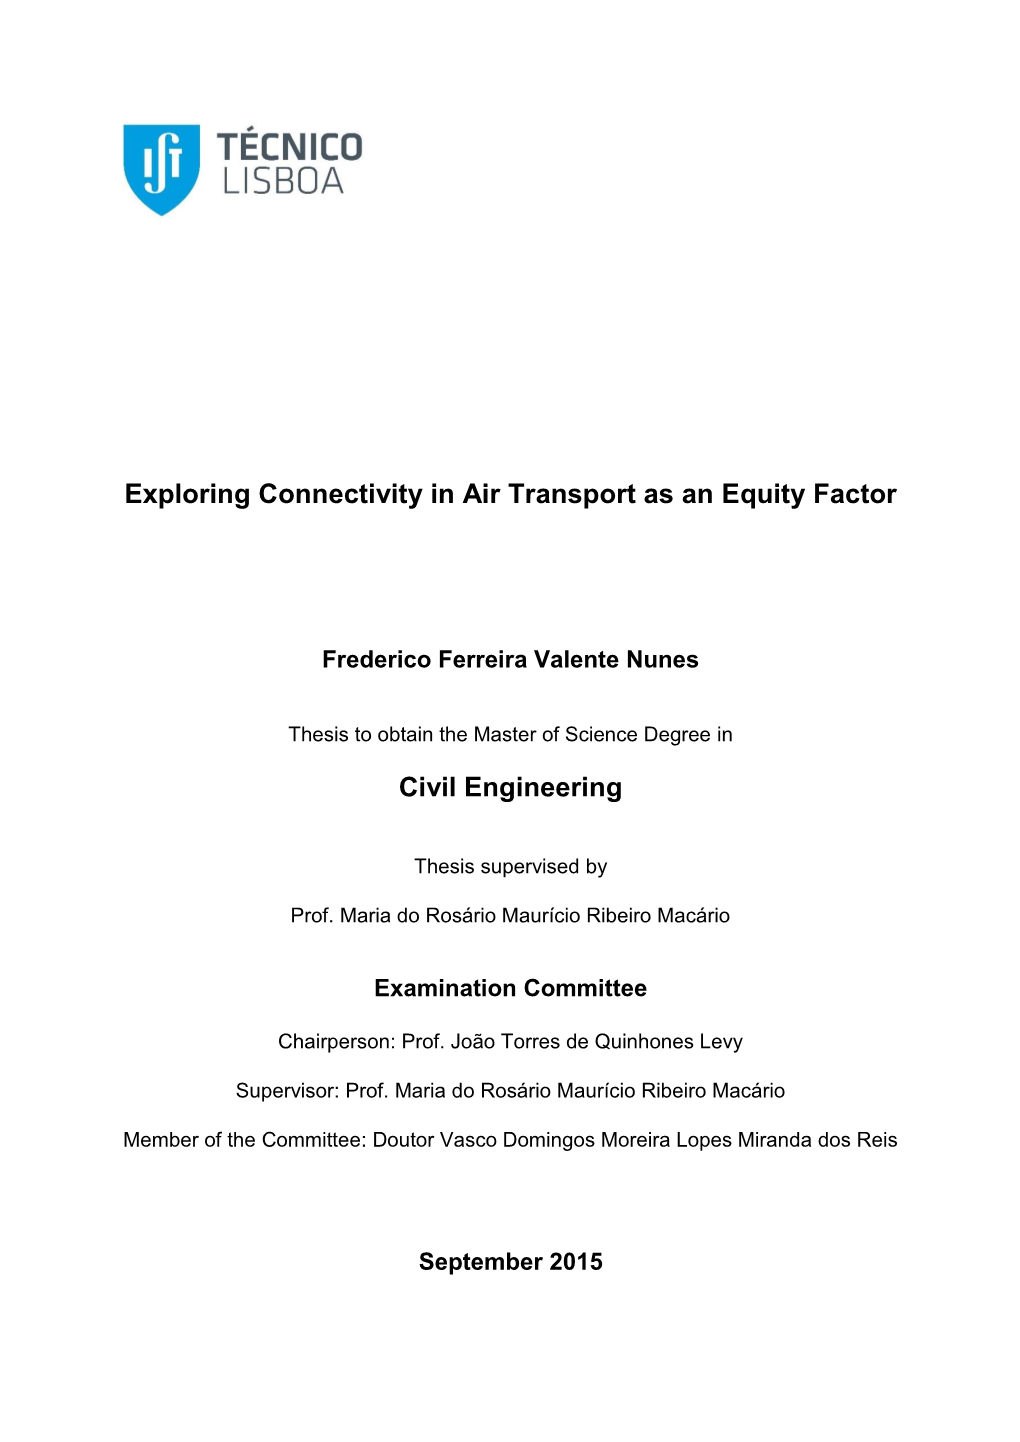 Exploring Connectivity in Air Transport As an Equity Factor